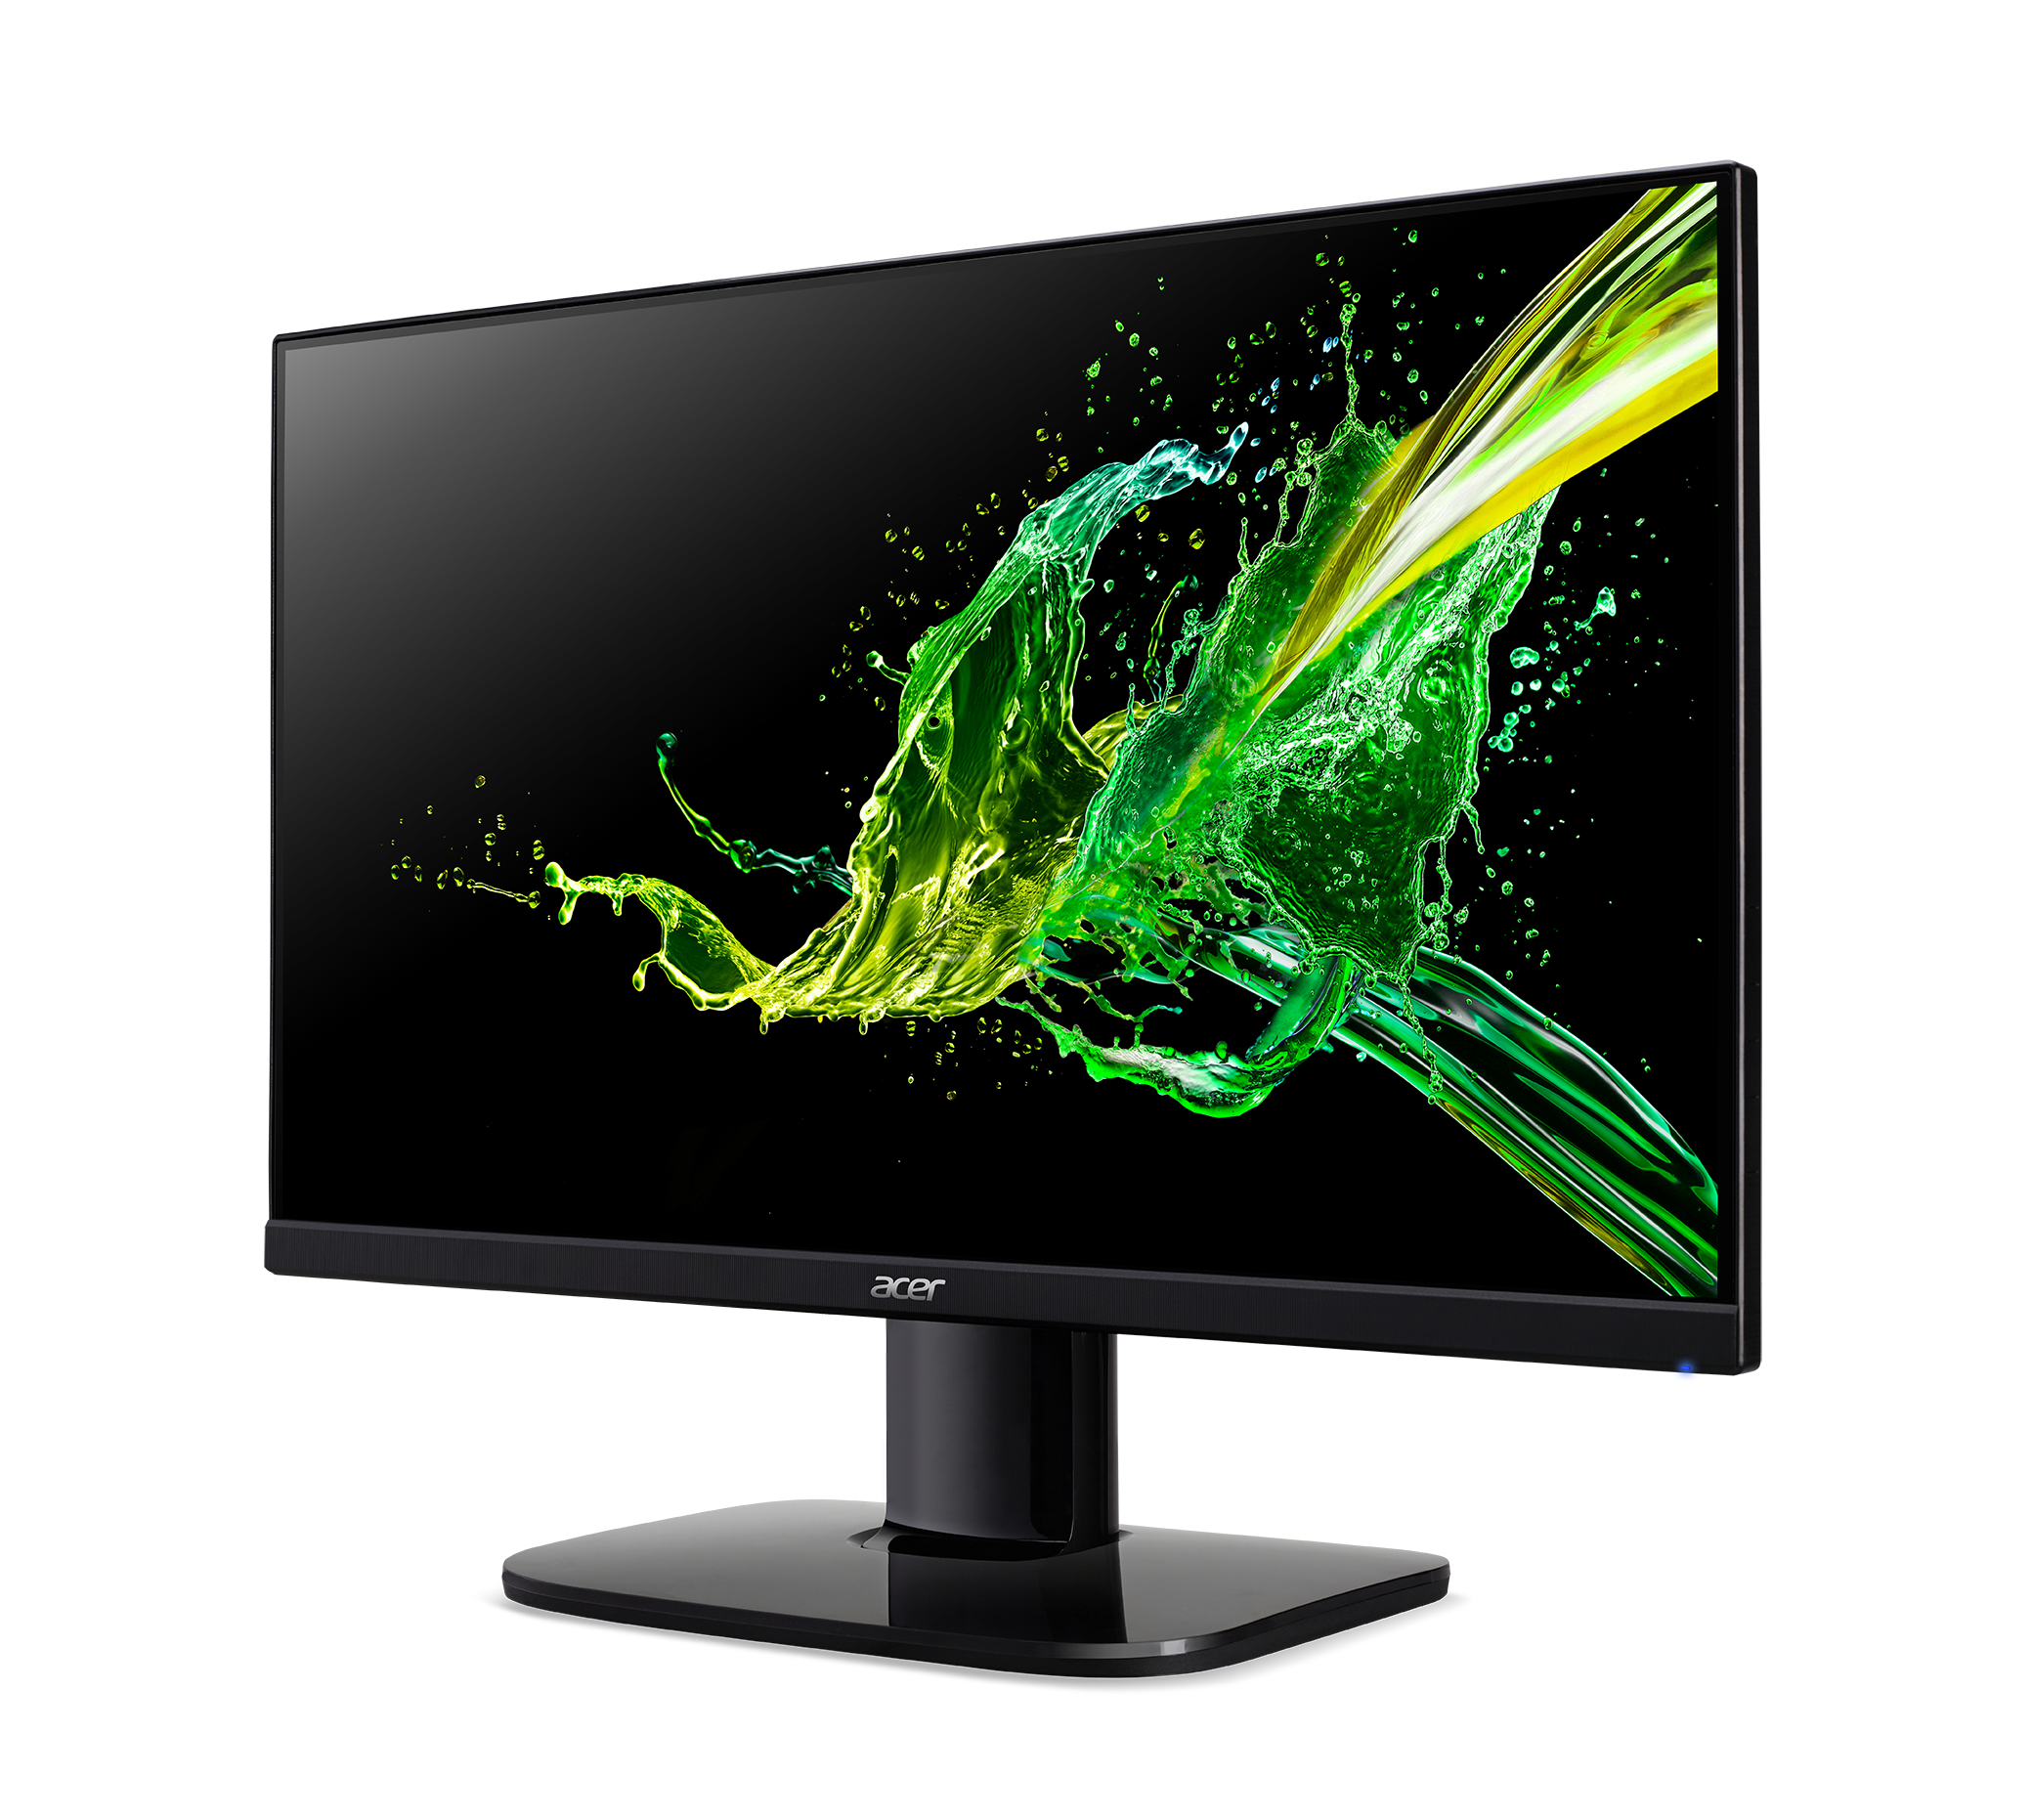 Acer KW272U bmiipx 27” WQHD 2560 x 1440 IPS Monitor with 75Hz Refresh Rate with AMD RADEON FreeSync Technology (Display Port & 2 x HDMI 1.4 Ports) - image 3 of 6